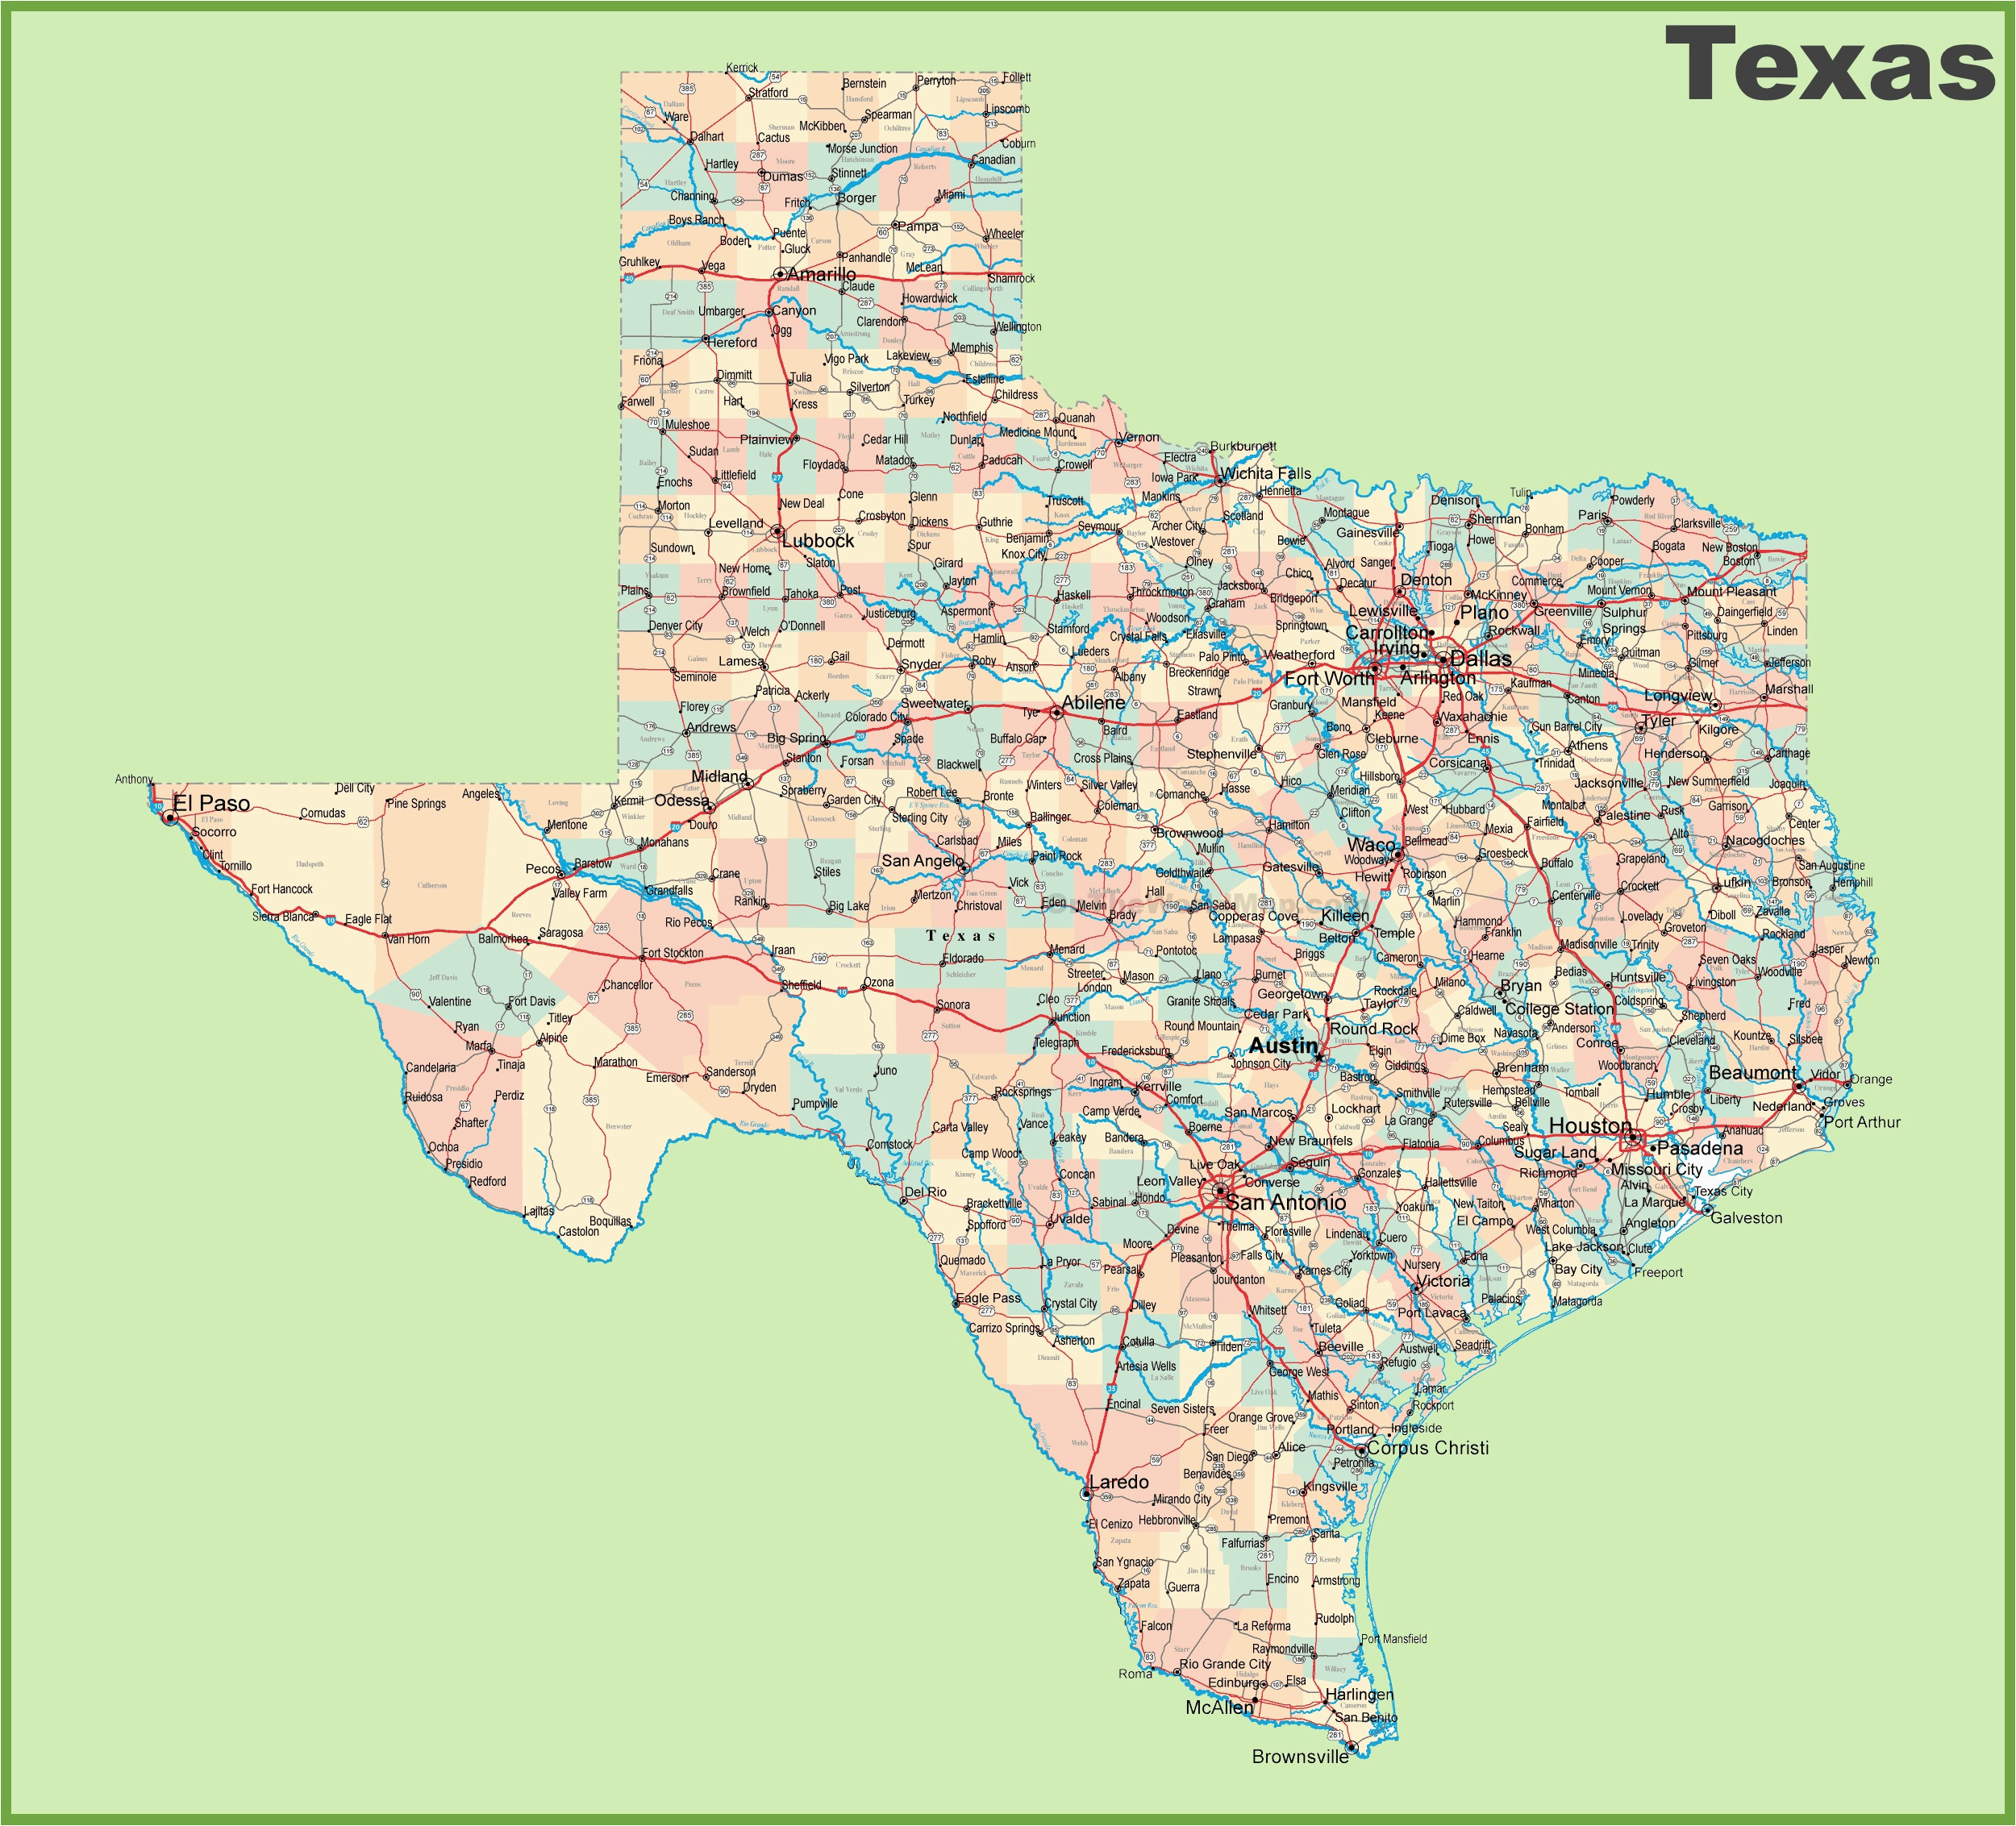 Texas County Maps with Roads Road Map Of Texas with Cities